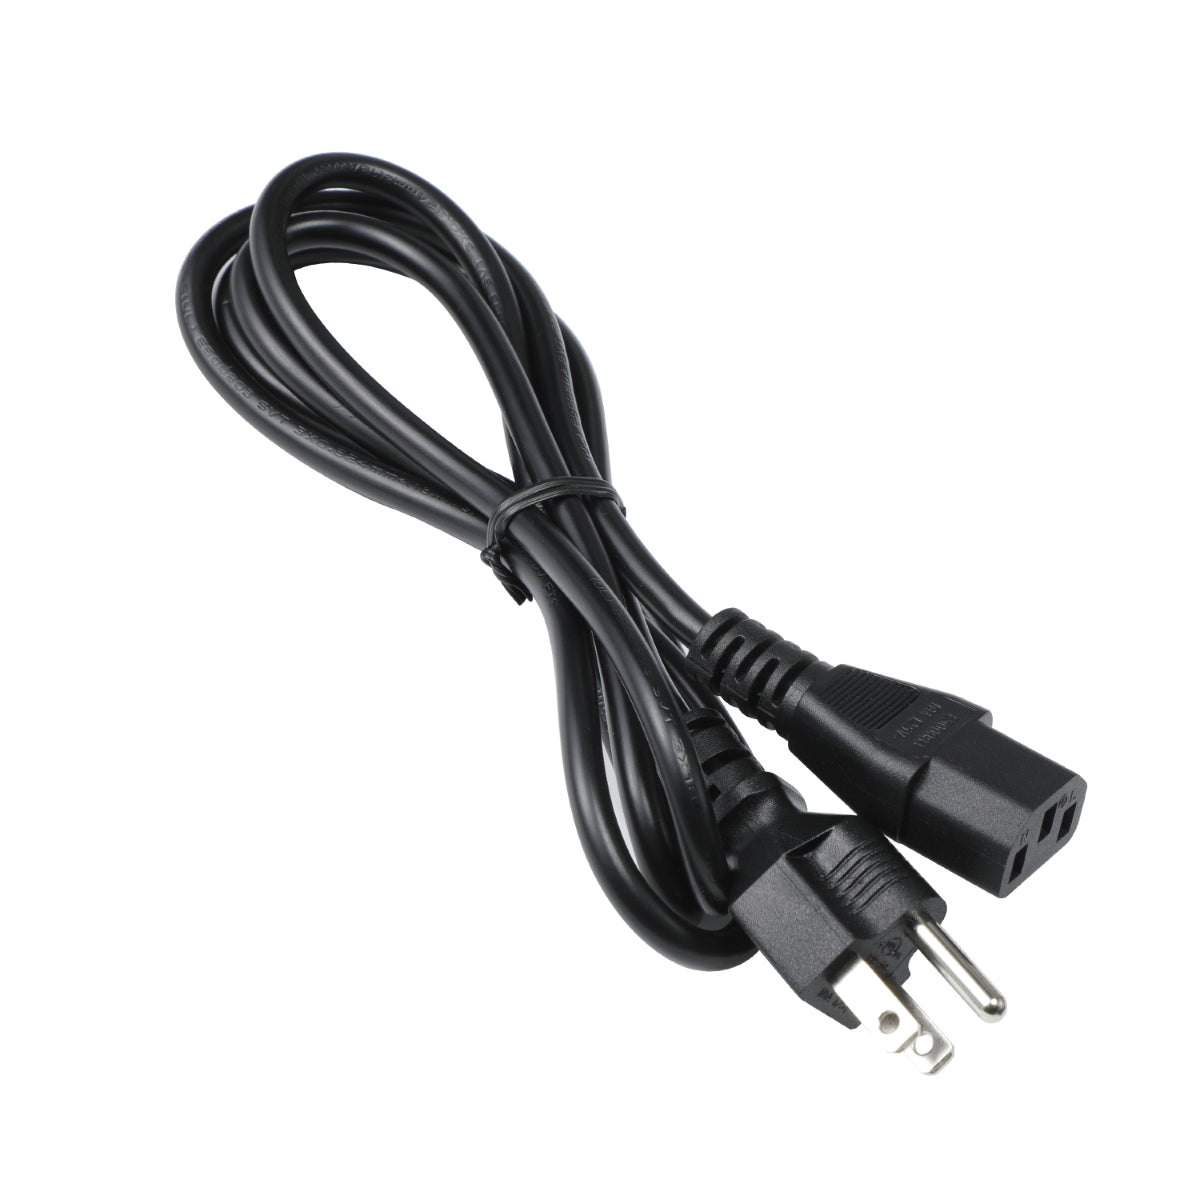 Power Cord for HP Pavilion 550-036 Computer.